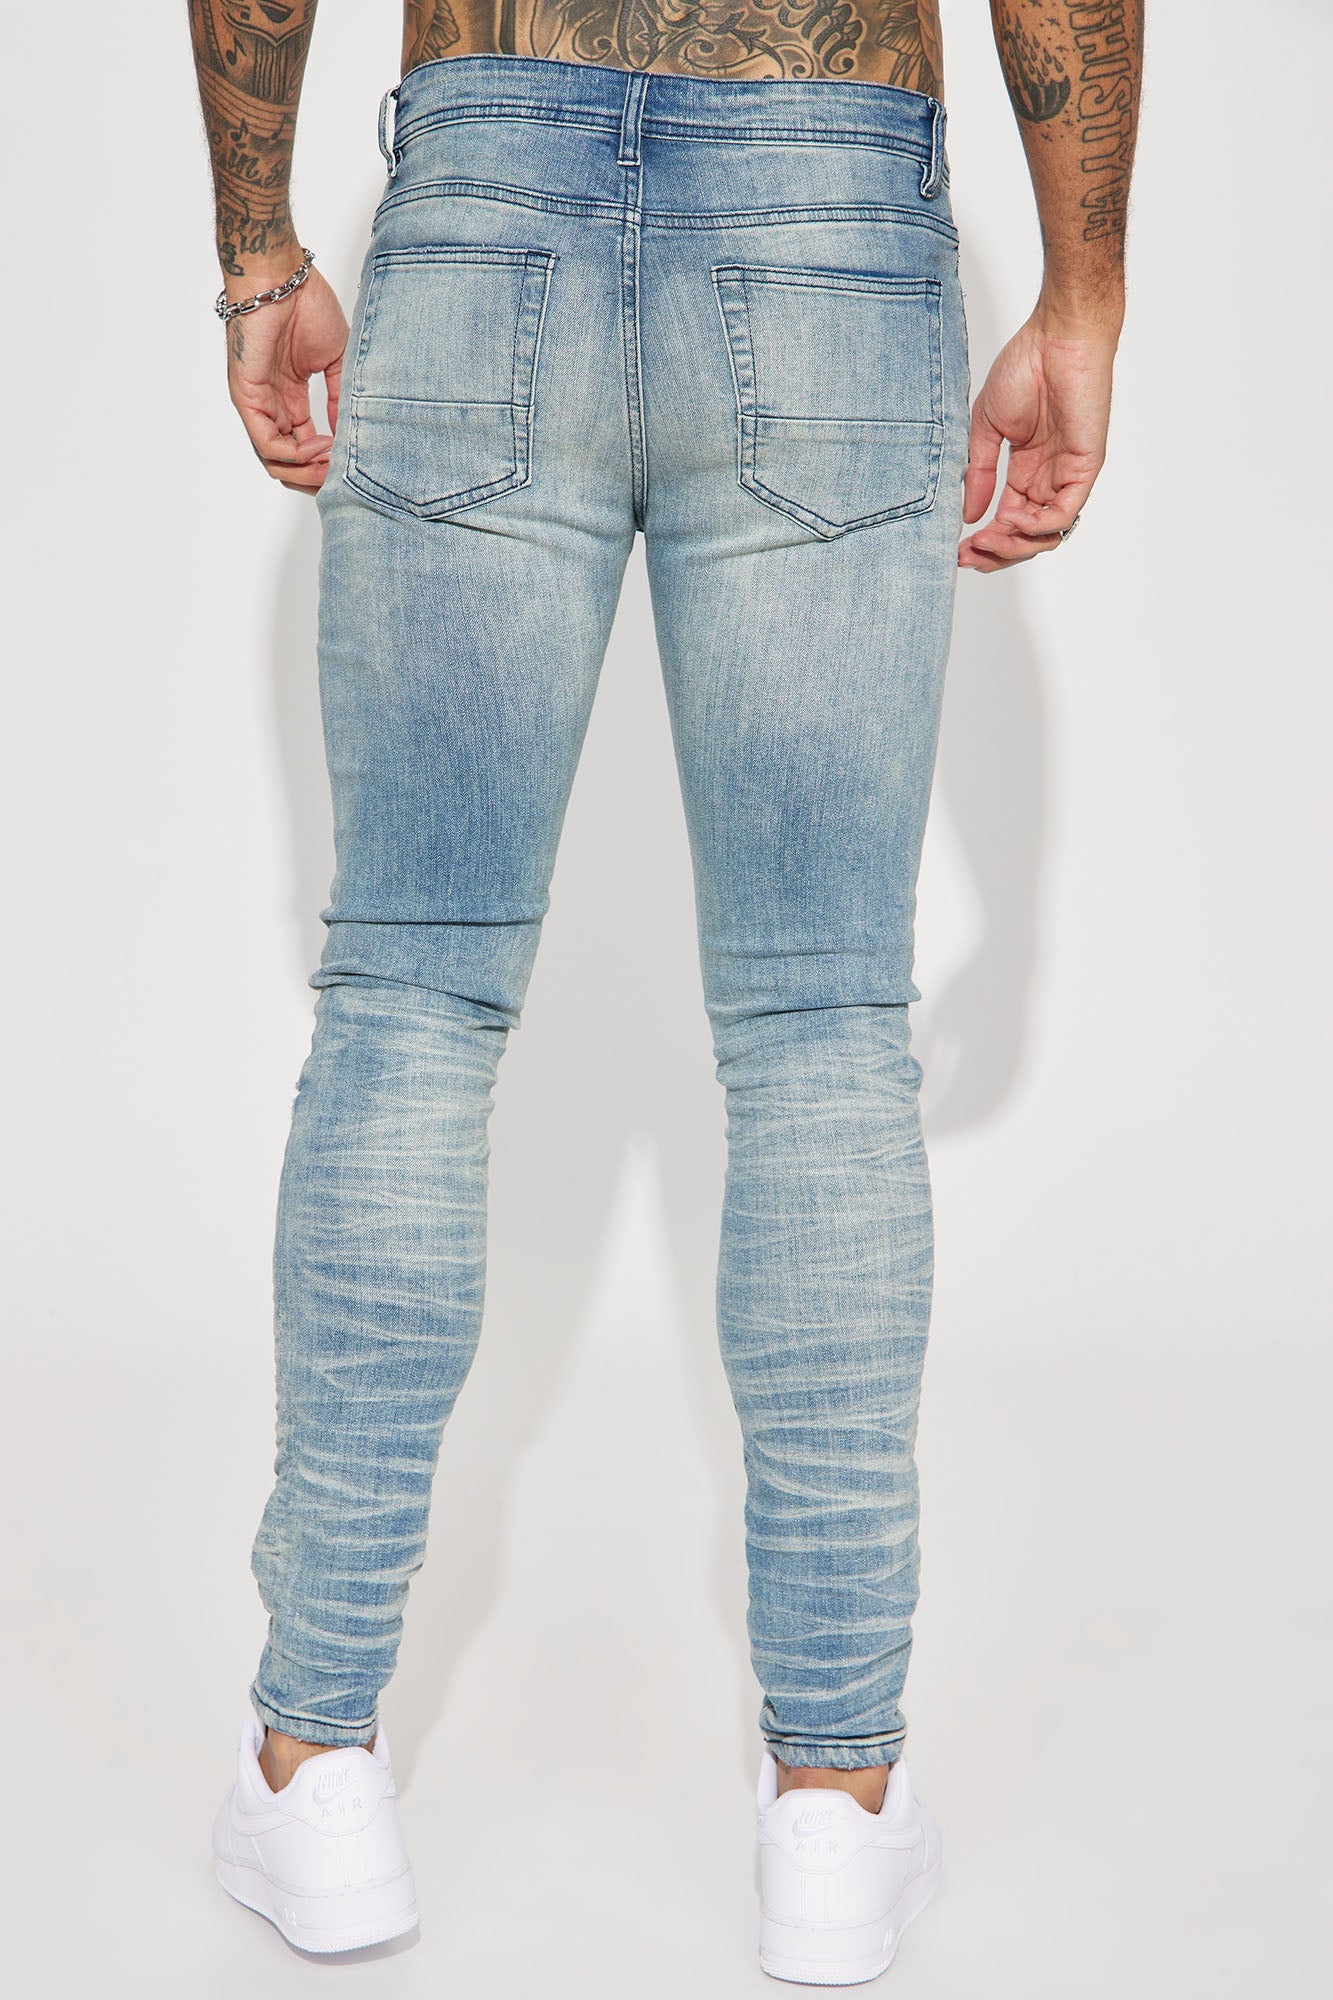 Fame Frenzy: Light Wash Paint-Spotted Stacked Skinny Jeans